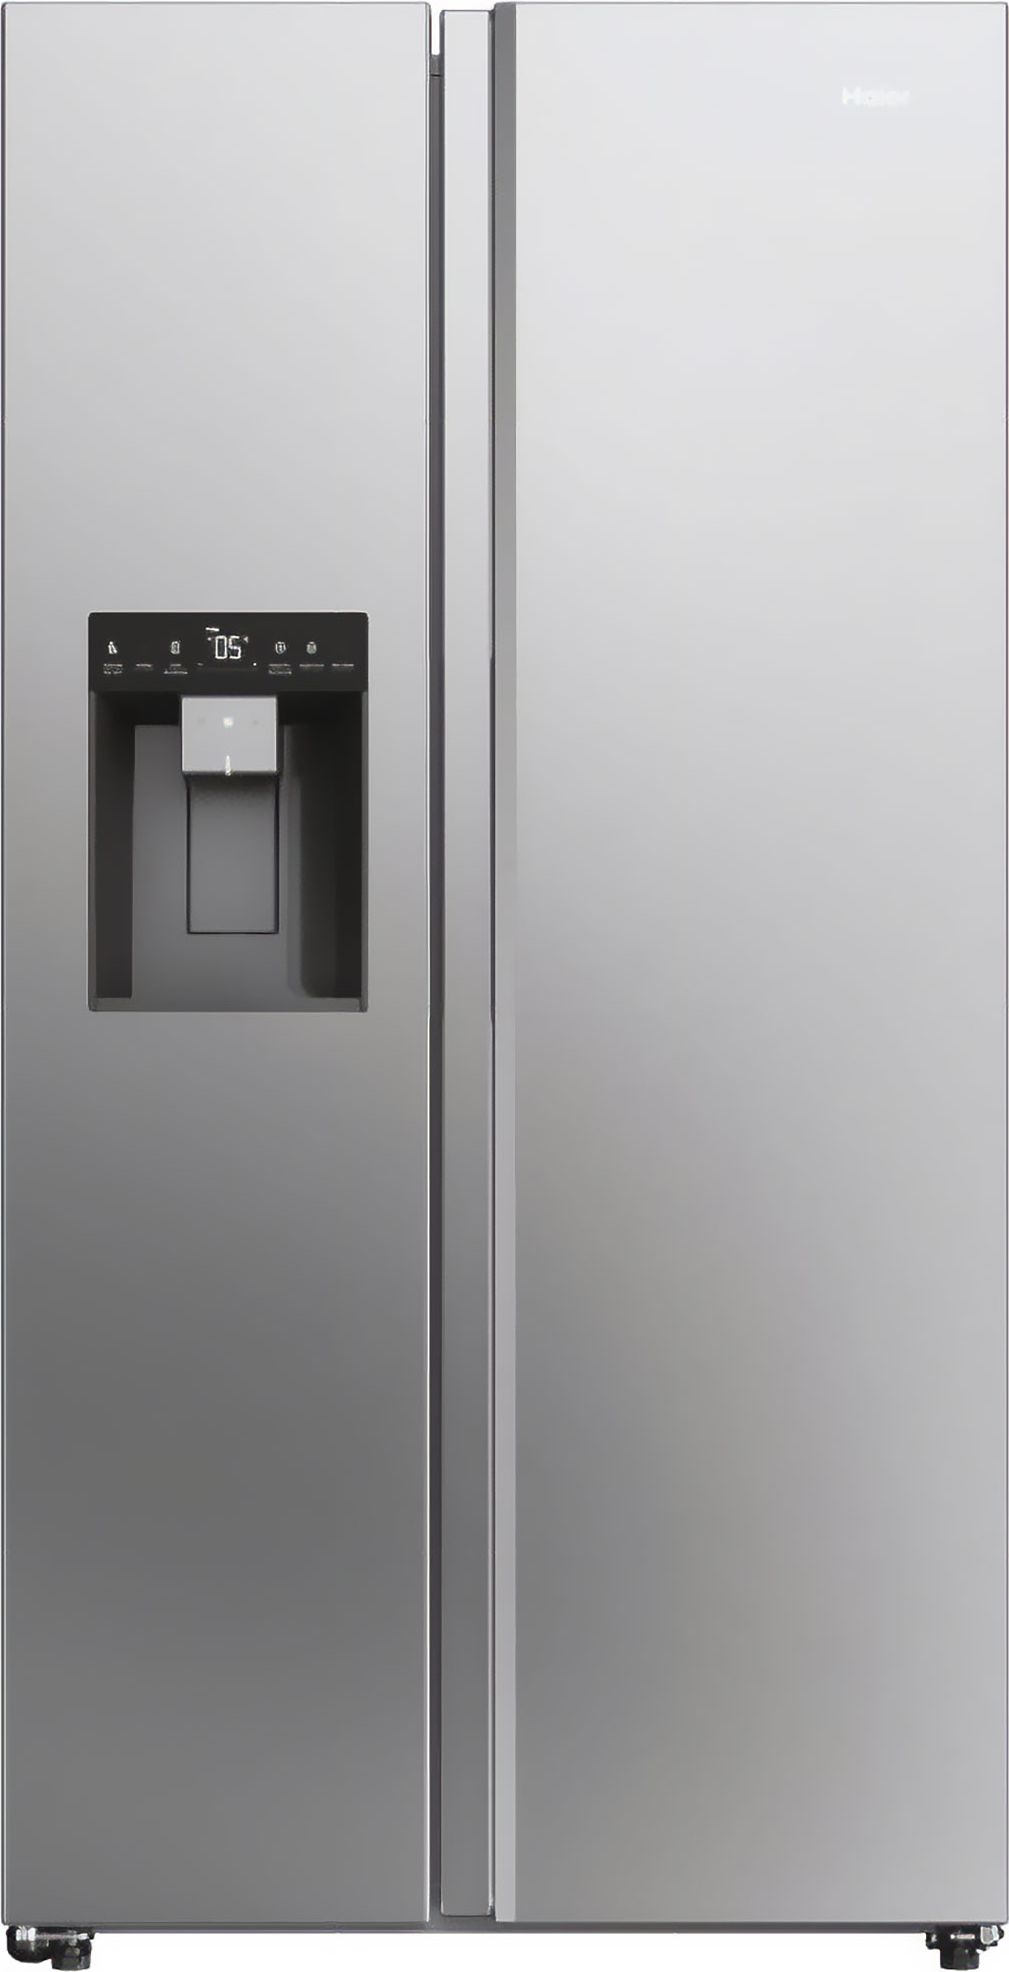 Haier HSW59F18DIMM Plumbed Frost Free American Fridge Freezer - Stainless Steel - D Rated, Stainless Steel